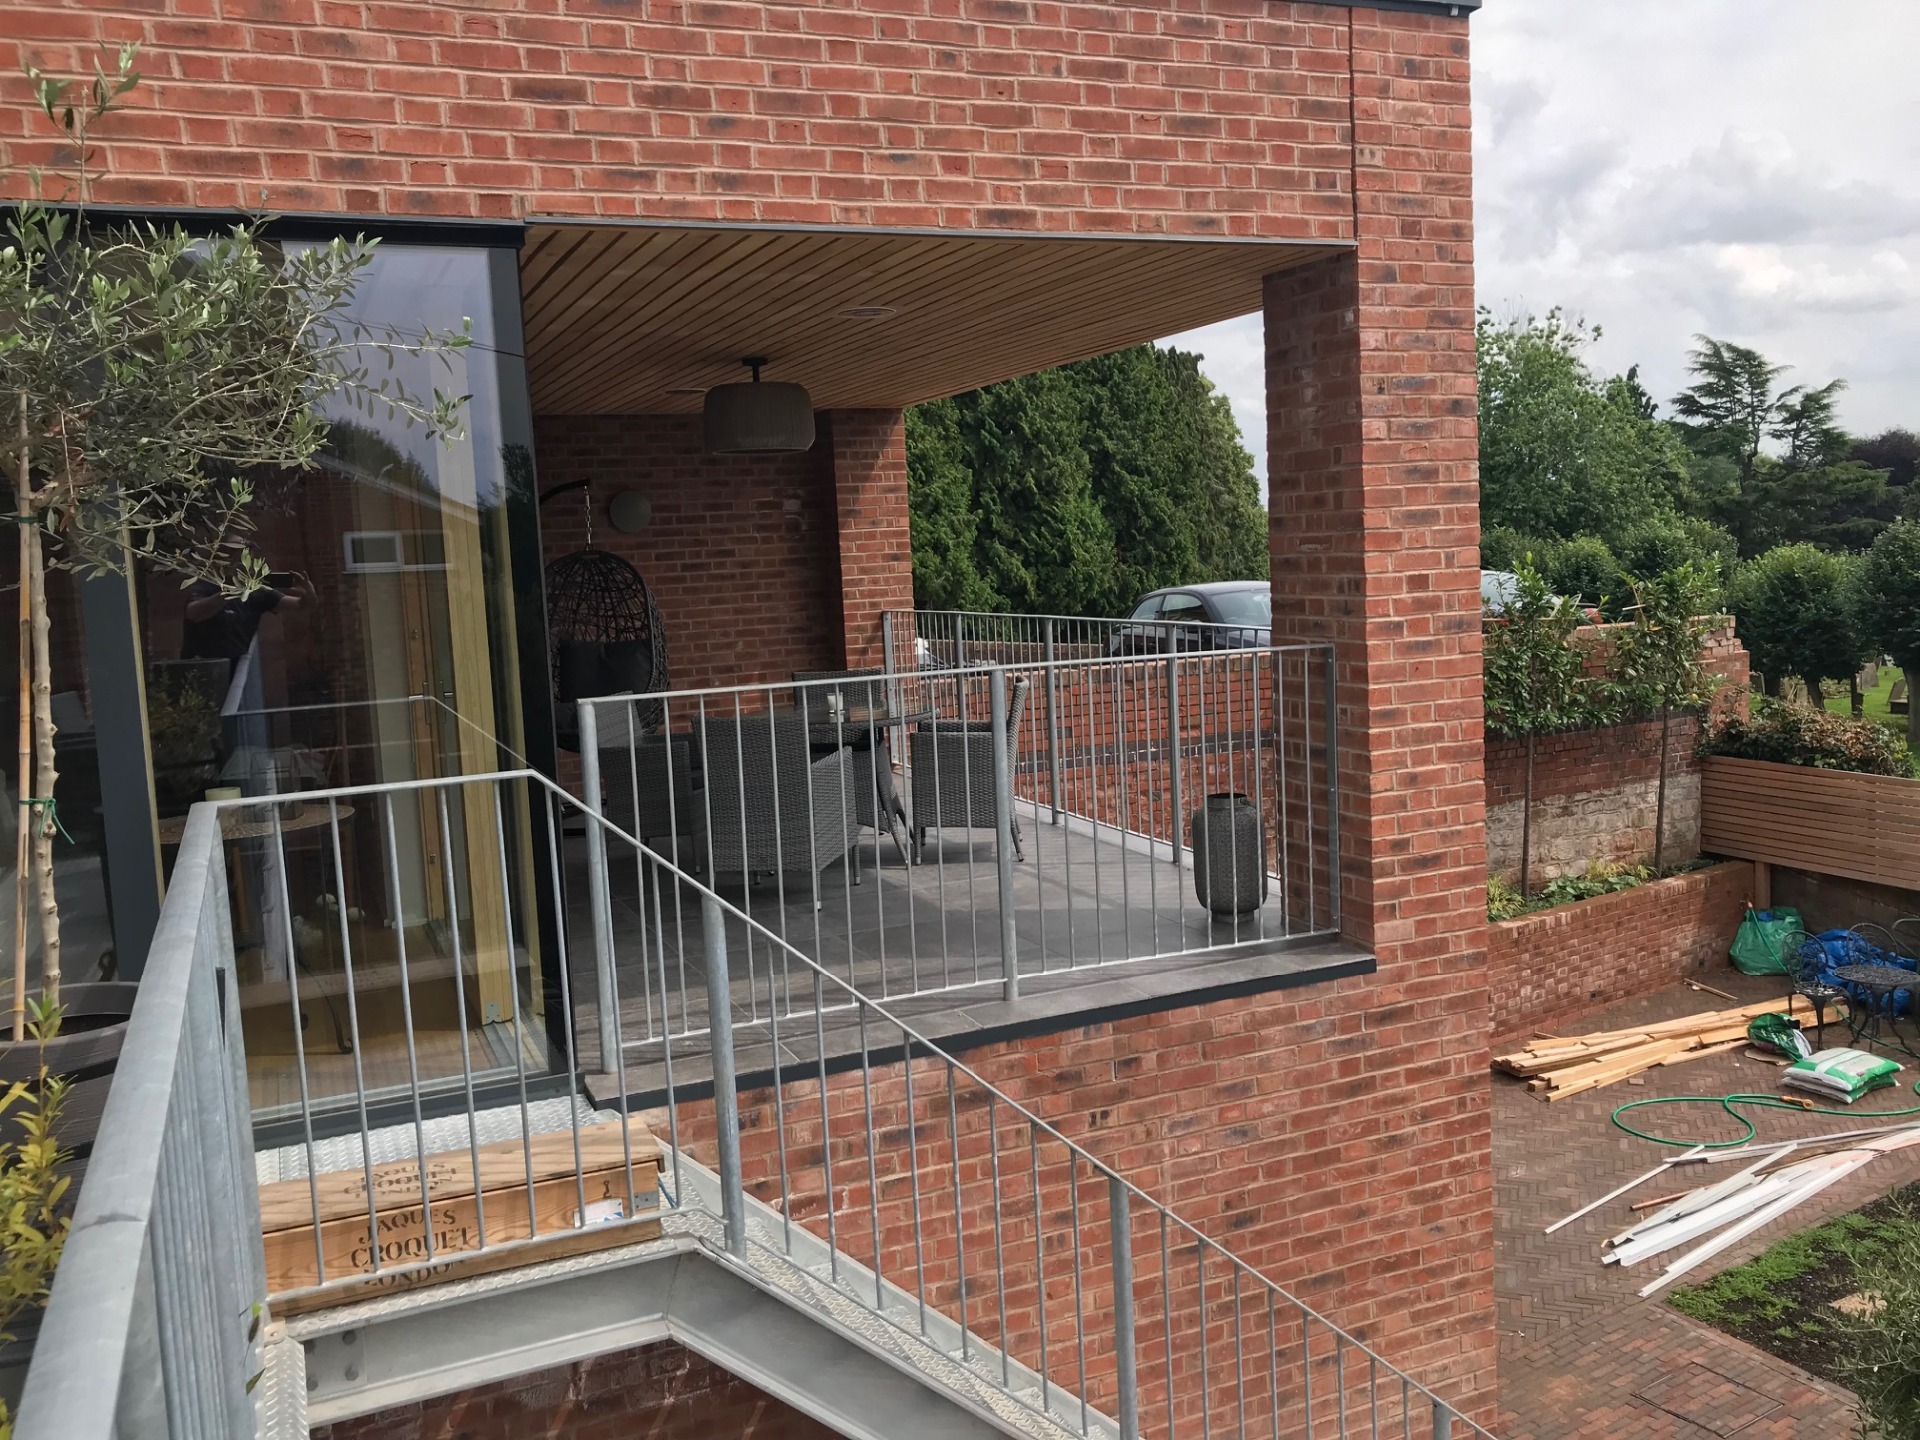 Mild Steel Vertical Bar Stair Balustrade with a Convex Handrail